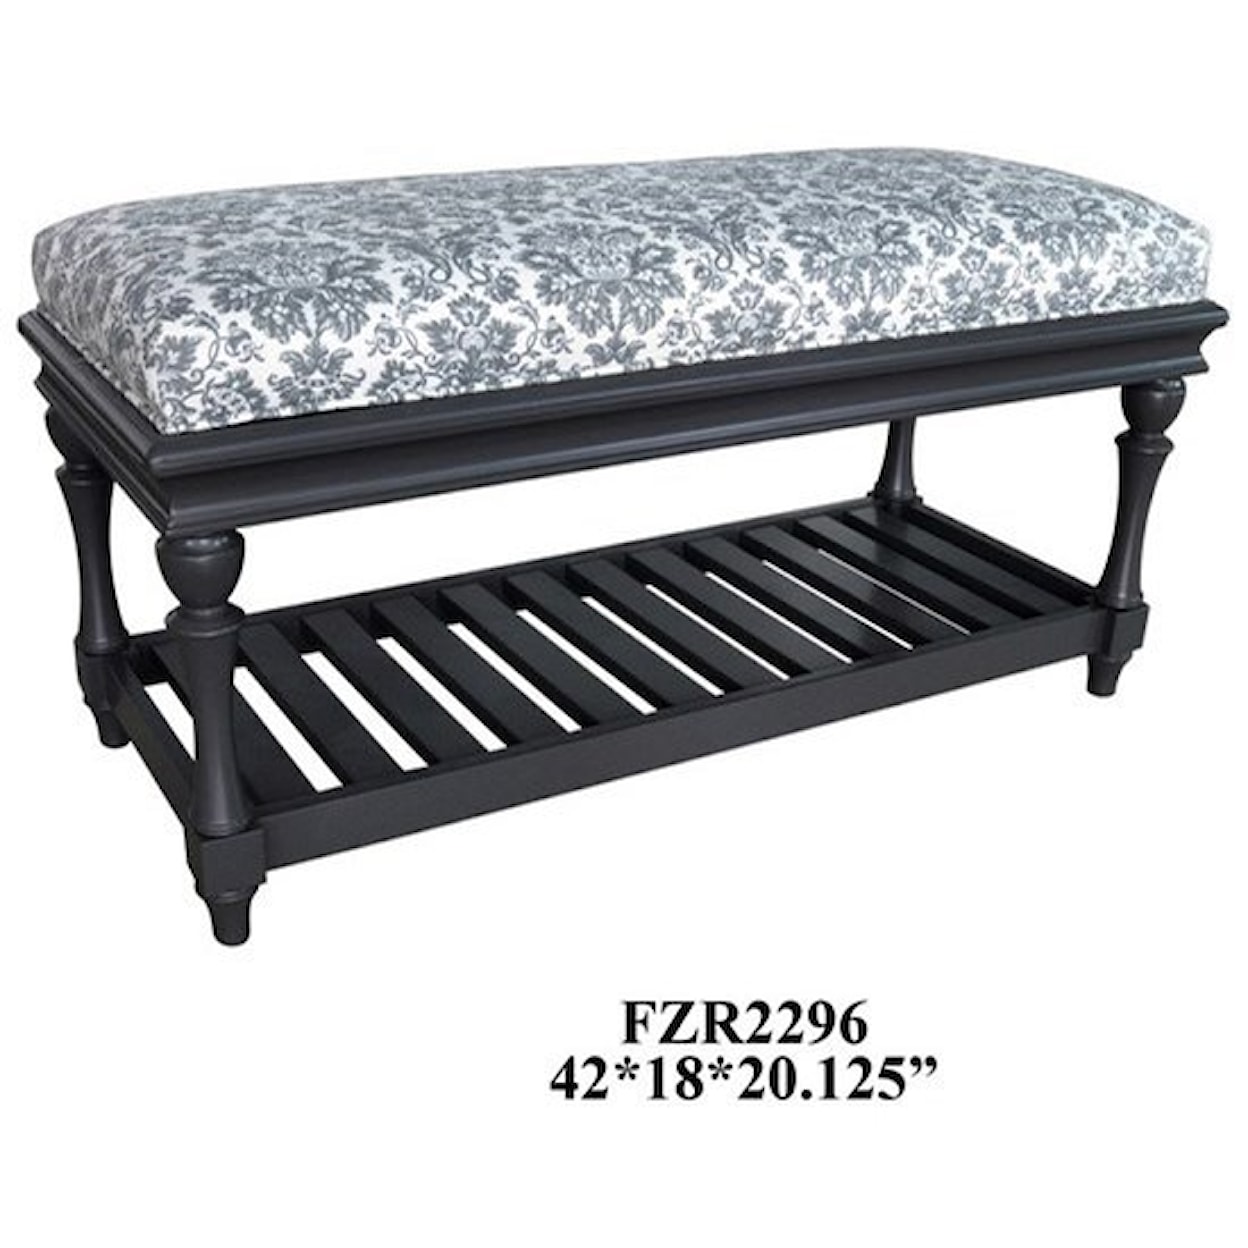 Crestview Collection Accent Furniture Abigail Grey Turned Leg Bench w/ Grey Floral